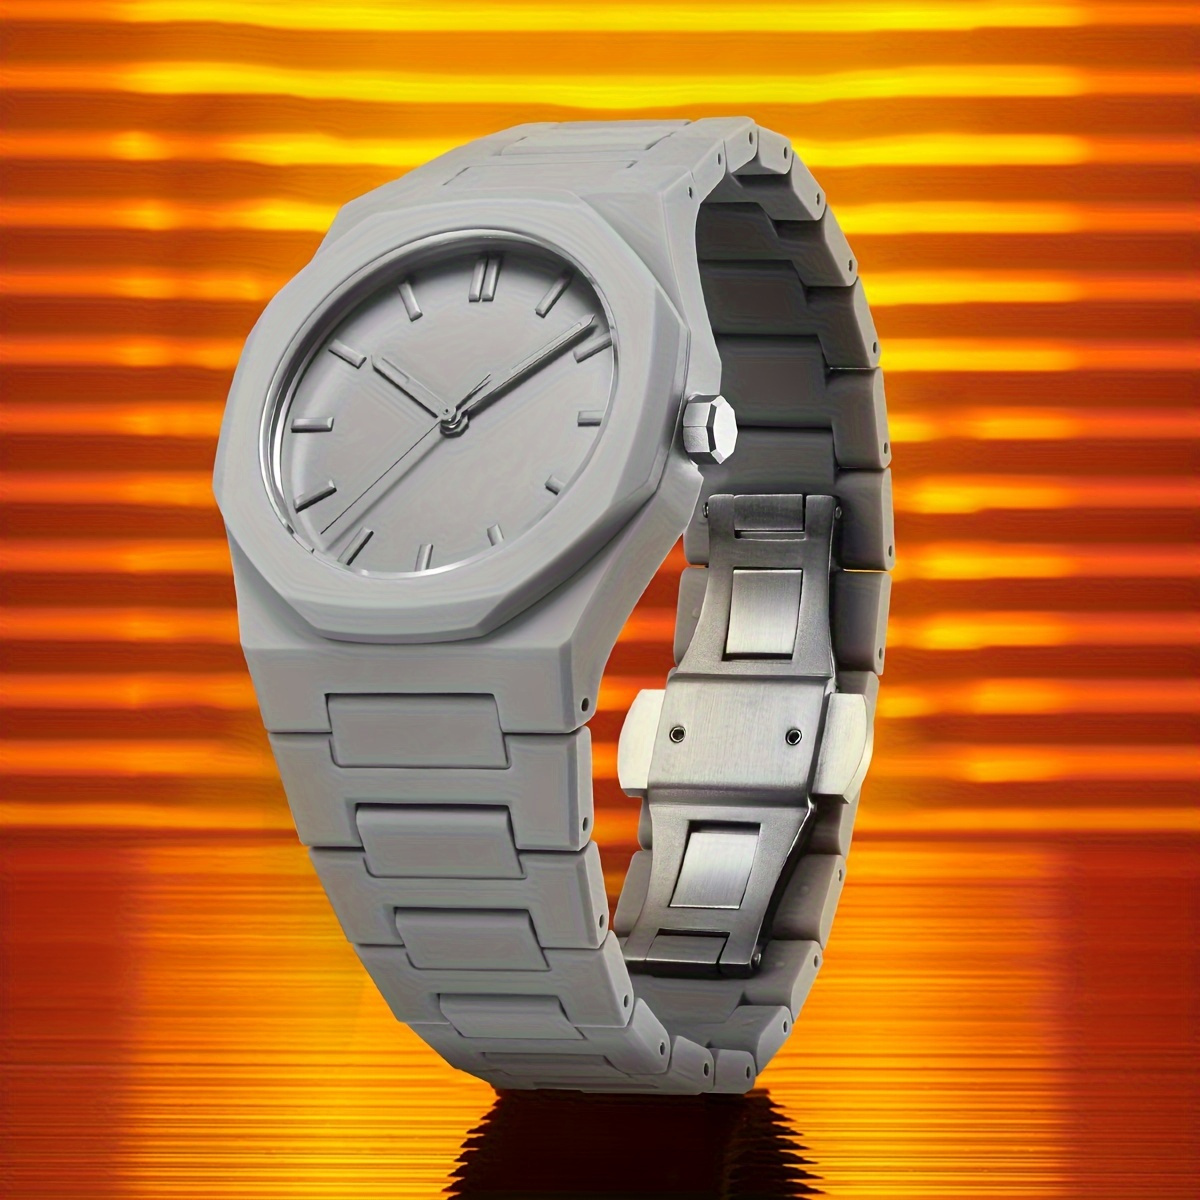 

Business Style Men's Grey Quartz Watch With Round Dial, Non-waterproof, Electronic Drive, Tpu & Plastic Strap - Simple Fashion Wristwatch With Polycarbonate Case